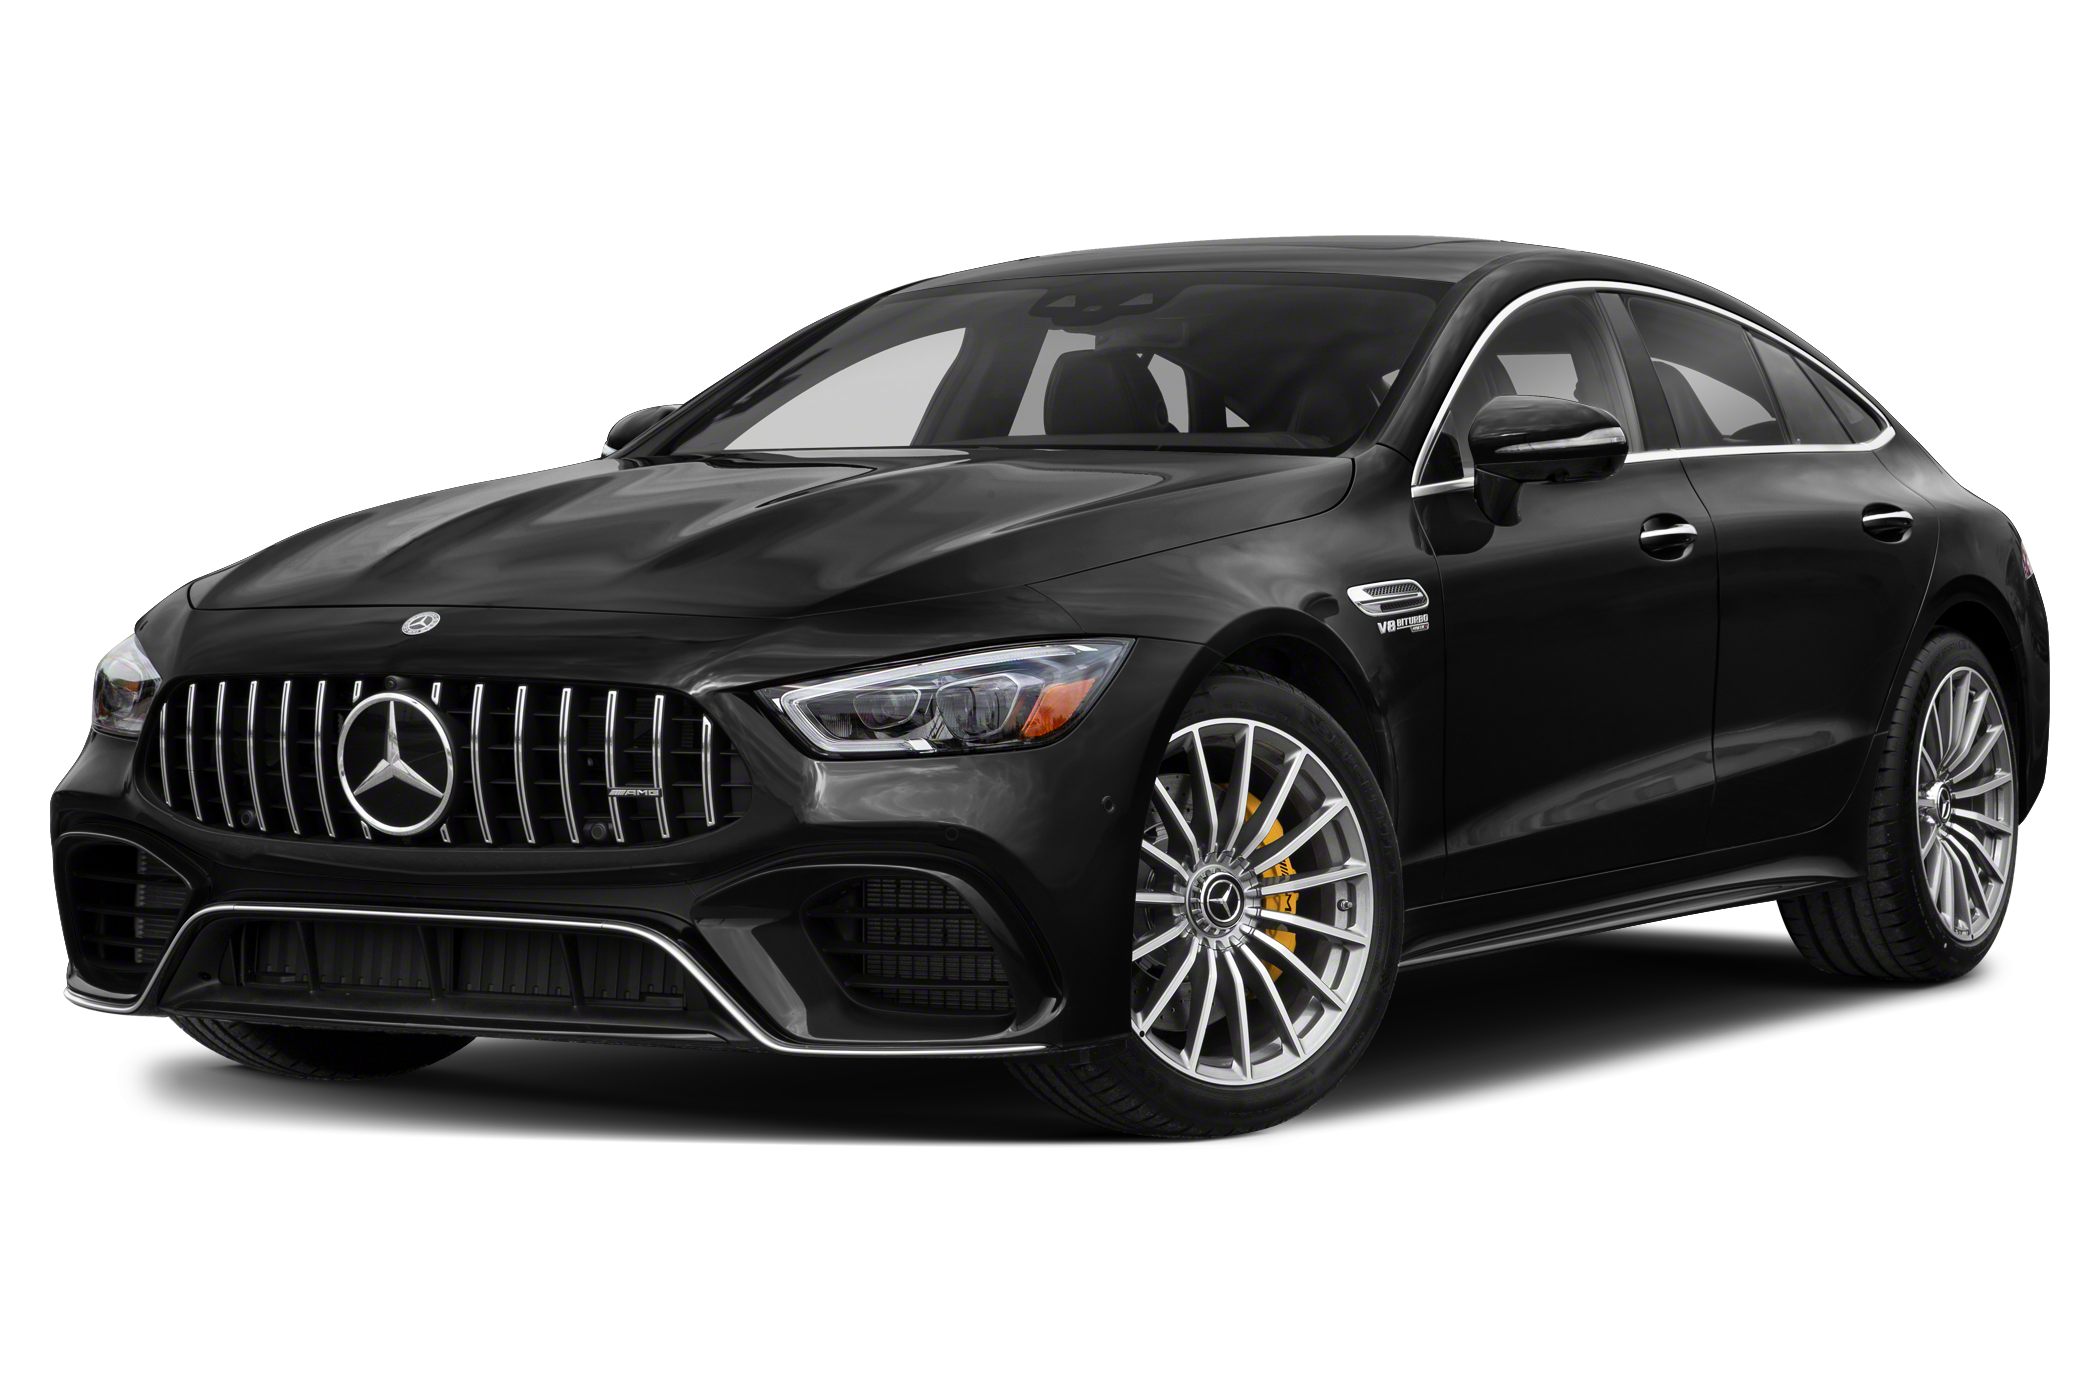 Mercedes Benz Amg Gt 63 Specs And Prices